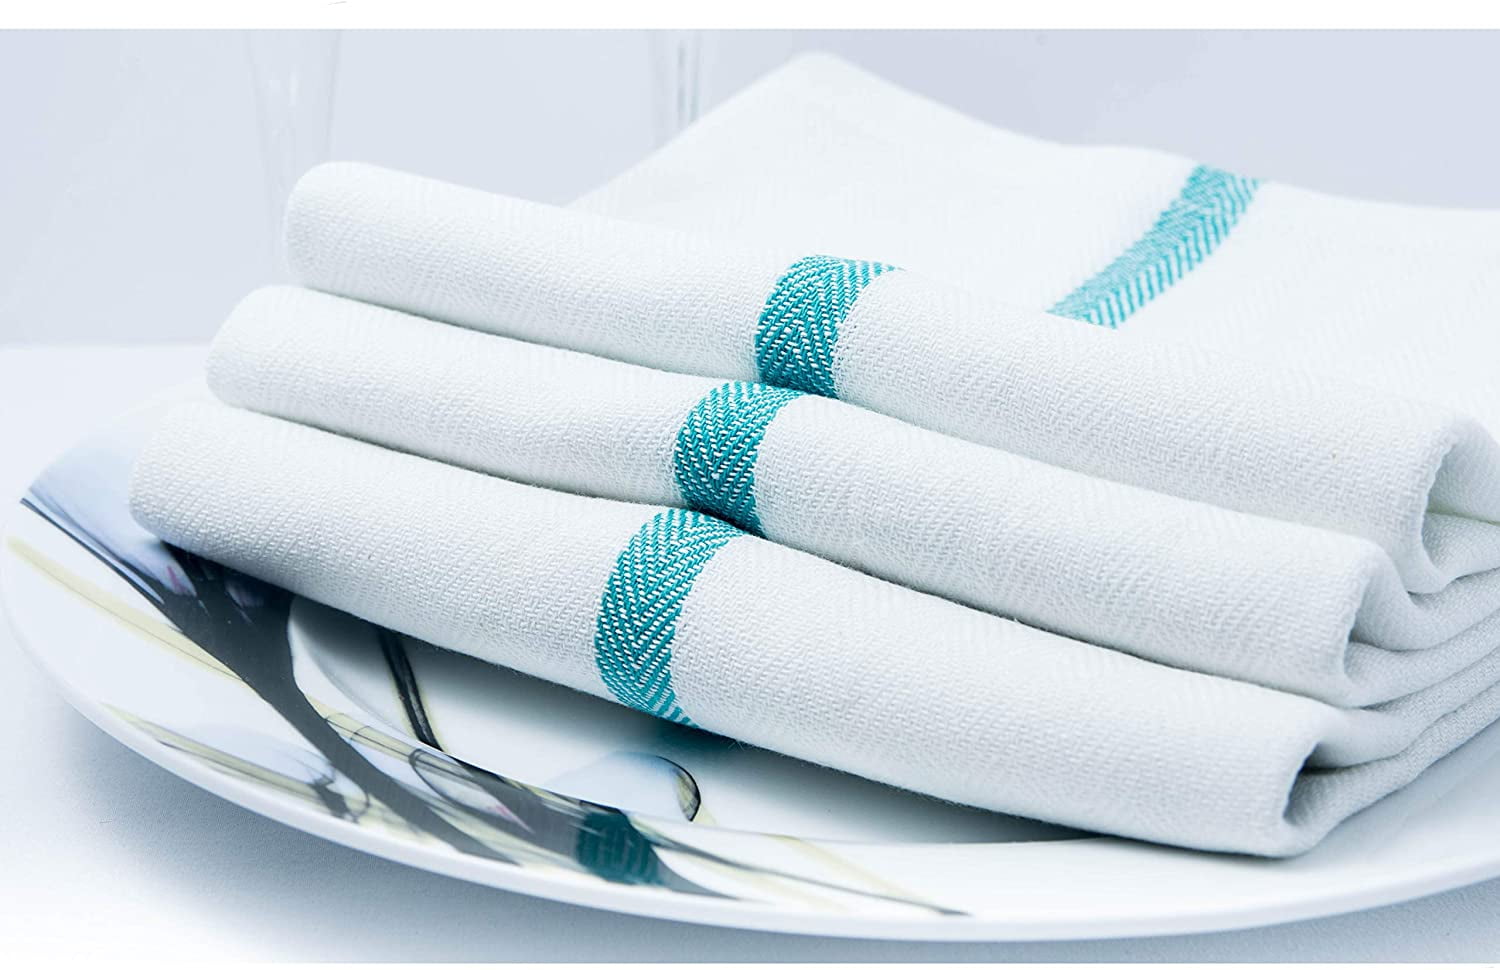 68cm x 45cm Pack of 6 Durable and Machine Washable Kitchen Towels for drying dishes Lint-Free HomeKnit Super Absorbent Tea Towels 100% Cotton Soft Fast Drying Waffle Dish Towels for Kitchen 